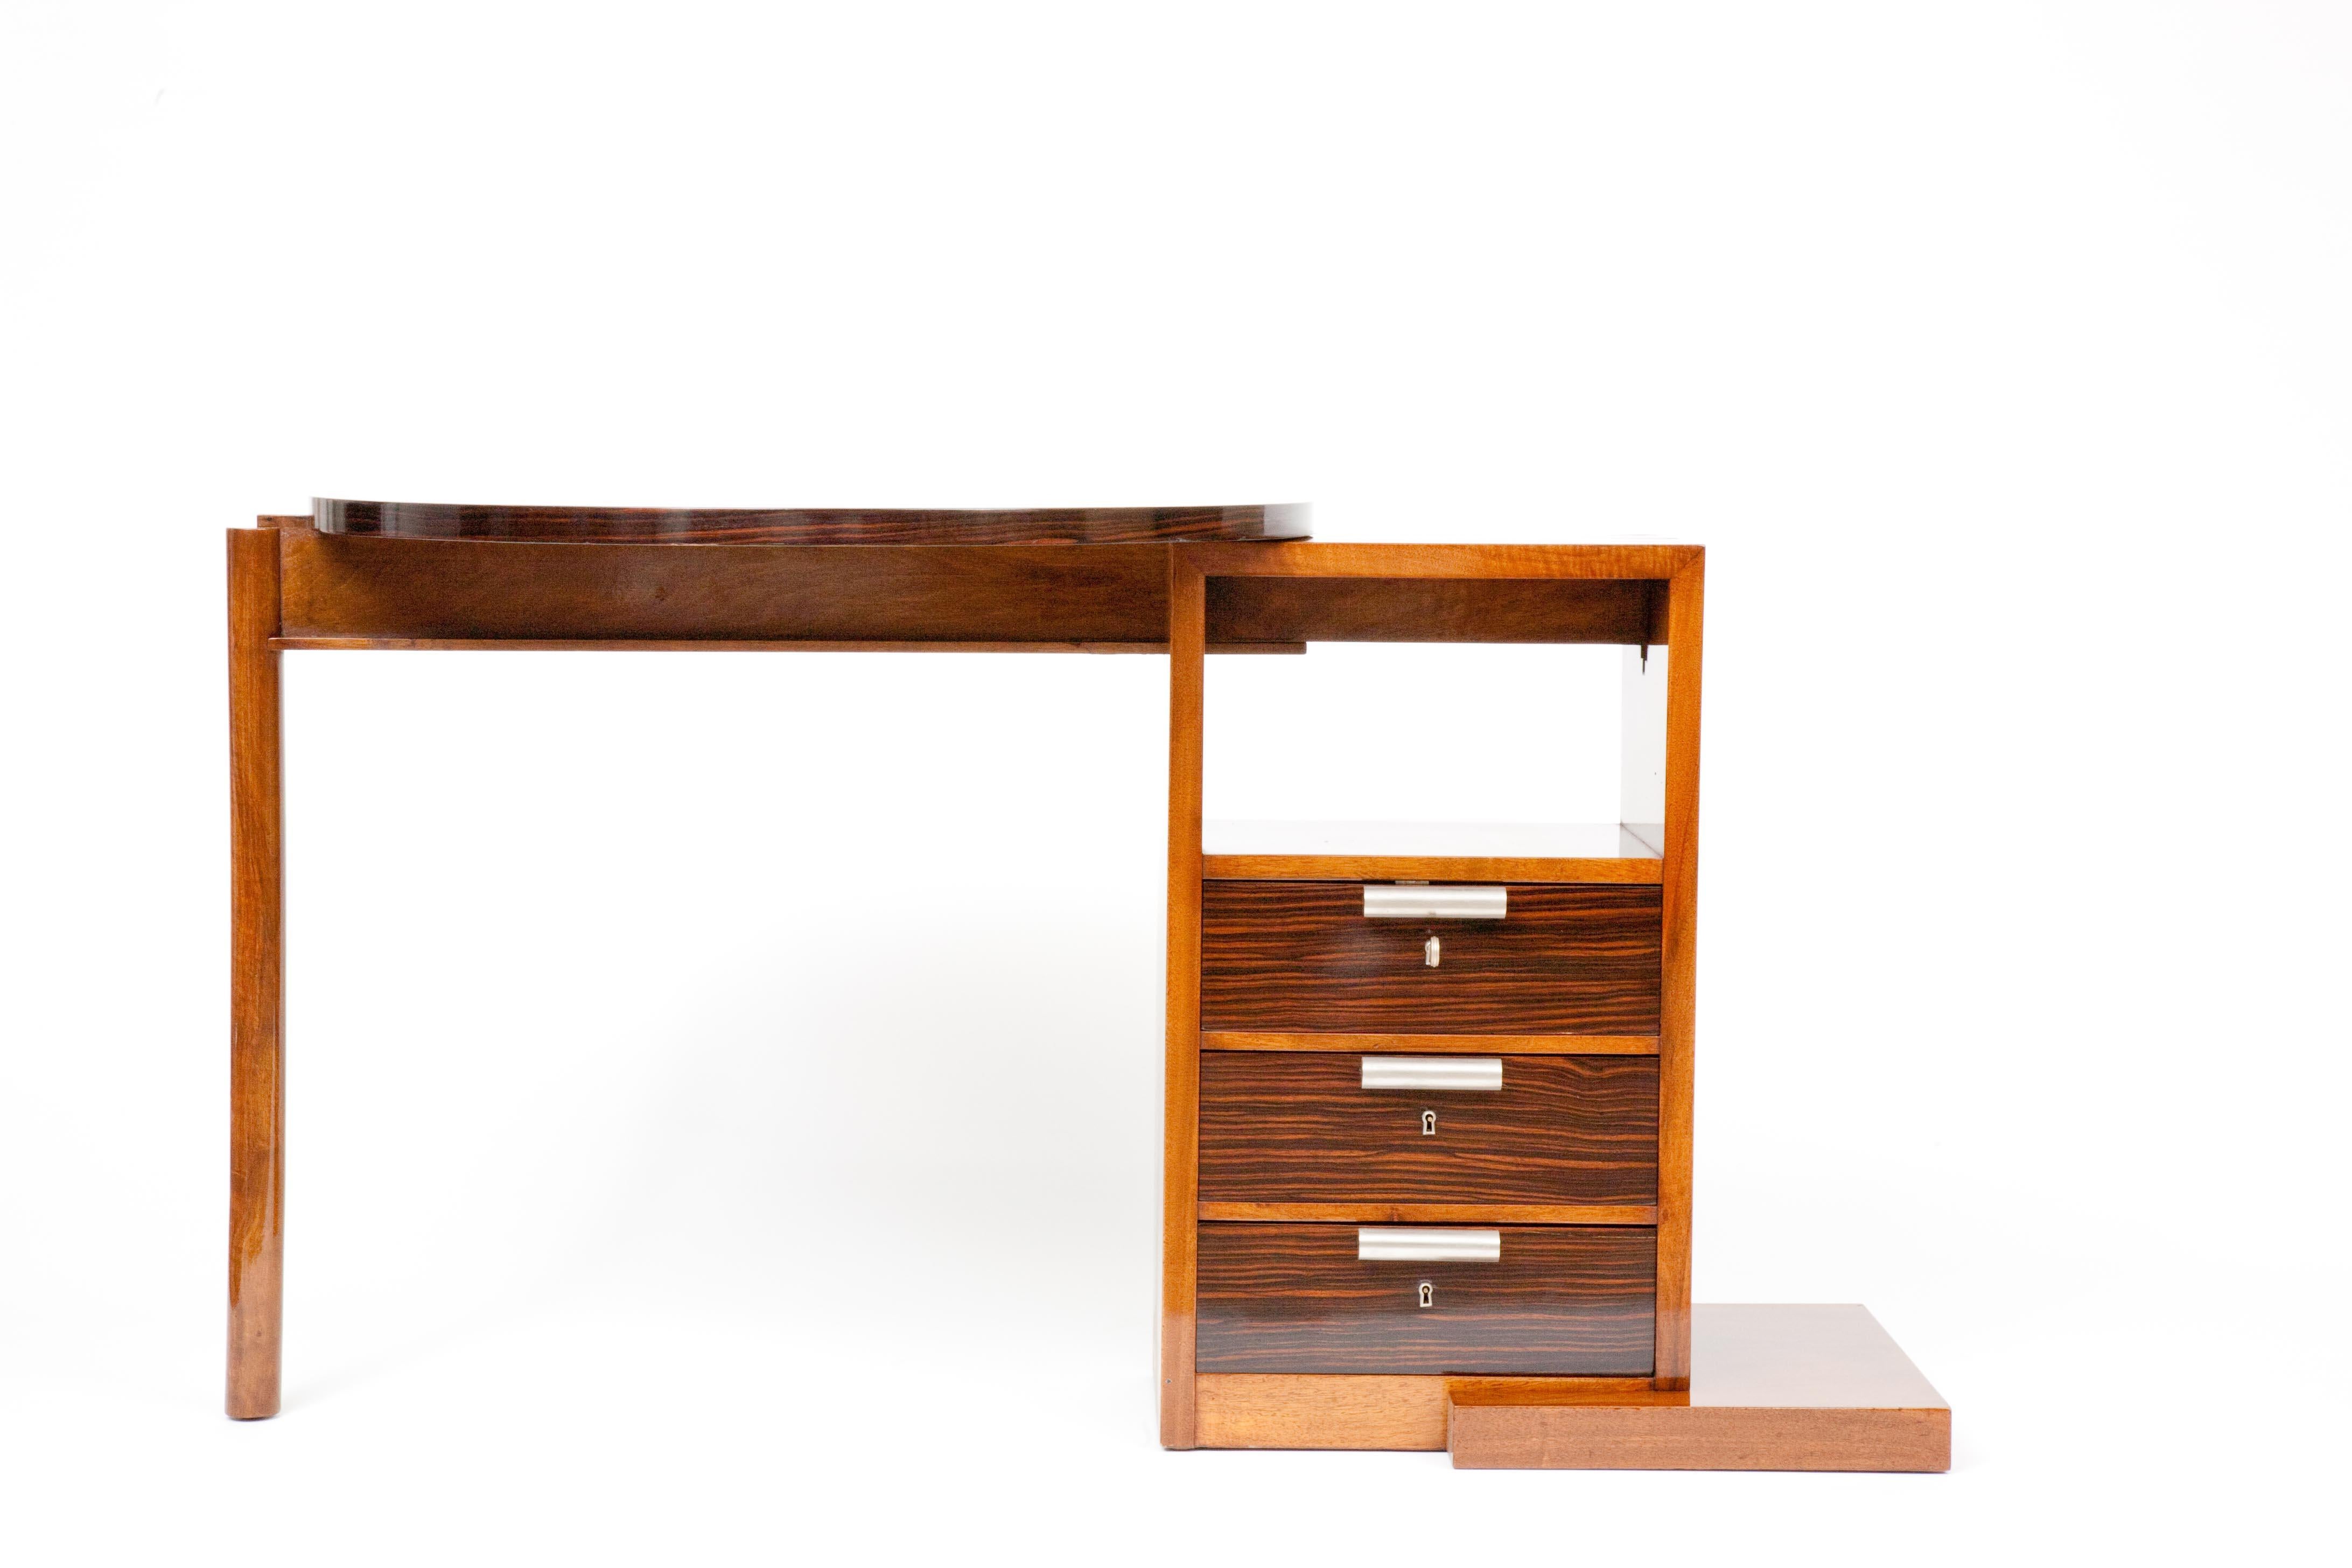 This extendable/adjustable desk is by André Sornay made with an exotic wood circa 1930. Its structure and design with the circular table top is very representative of Sornay's work.